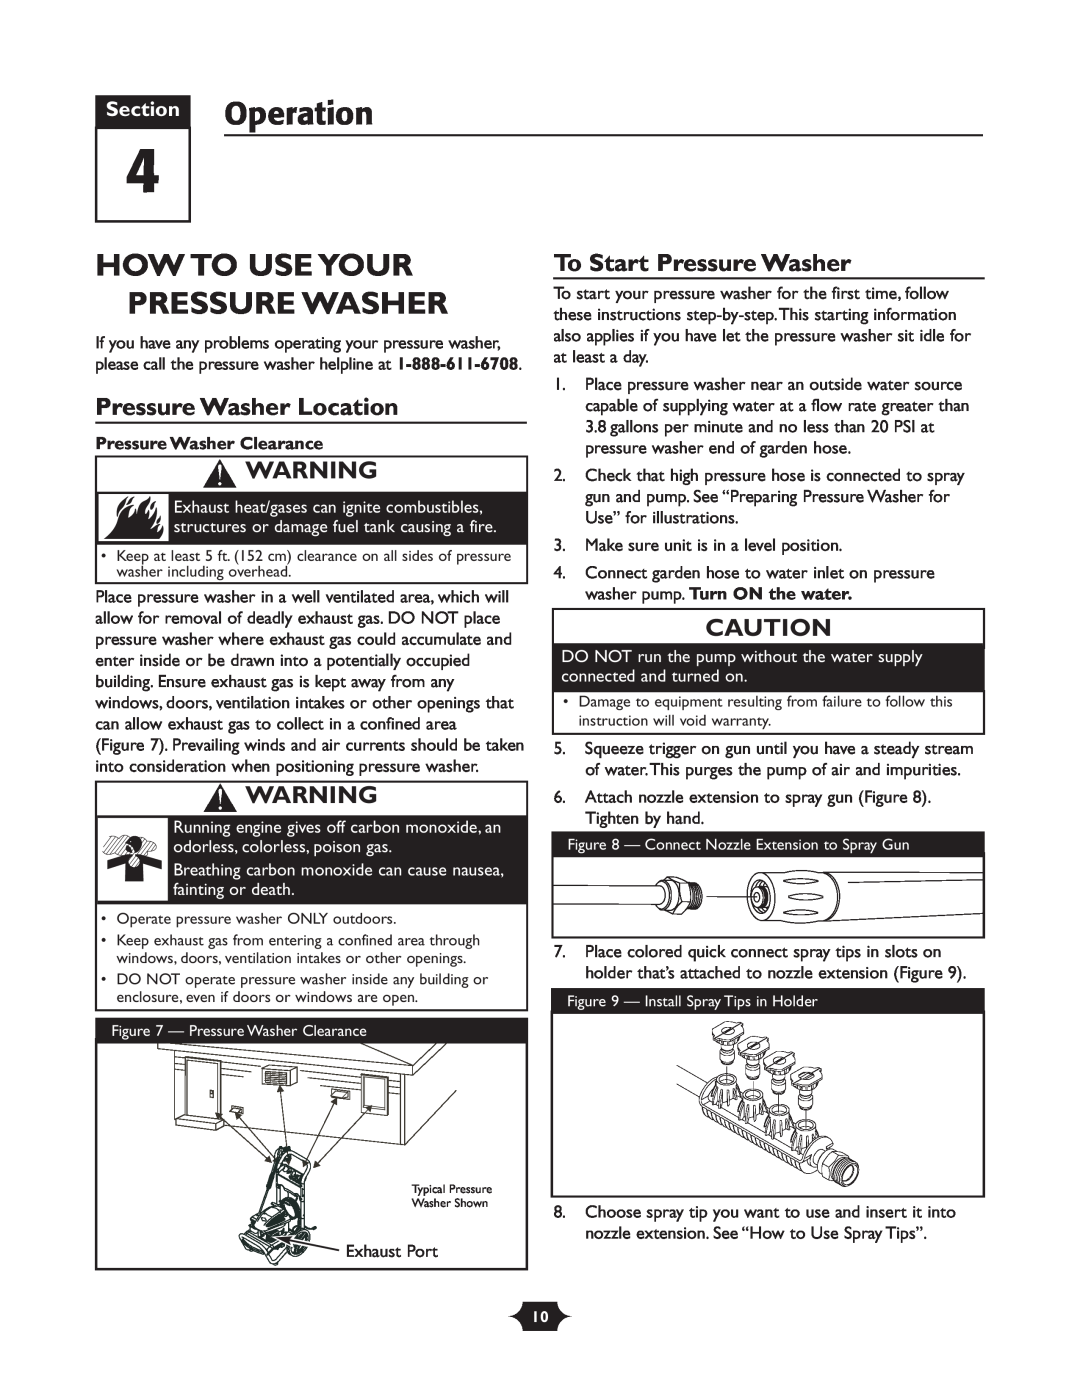 Troy-Bilt 020242-4 Section Operation, How To Use Your Pressure Washer, Pressure Washer Location, To Start Pressure Washer 